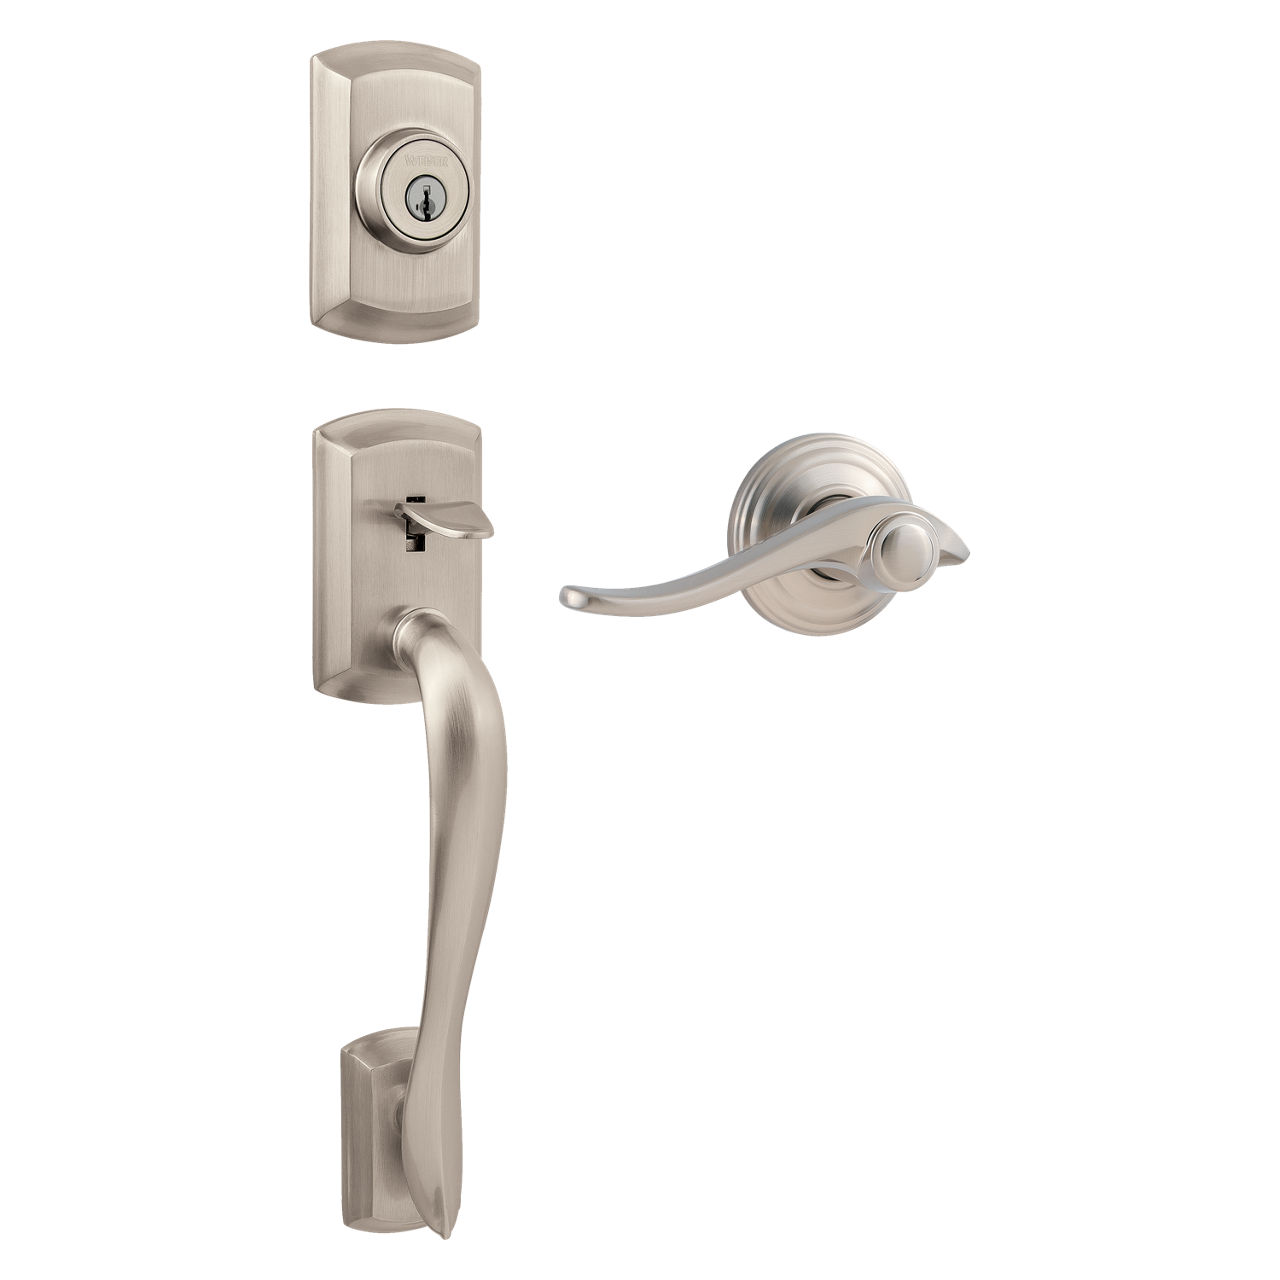 Avalon Handleset with Avalon Lever - featuring SmartKey